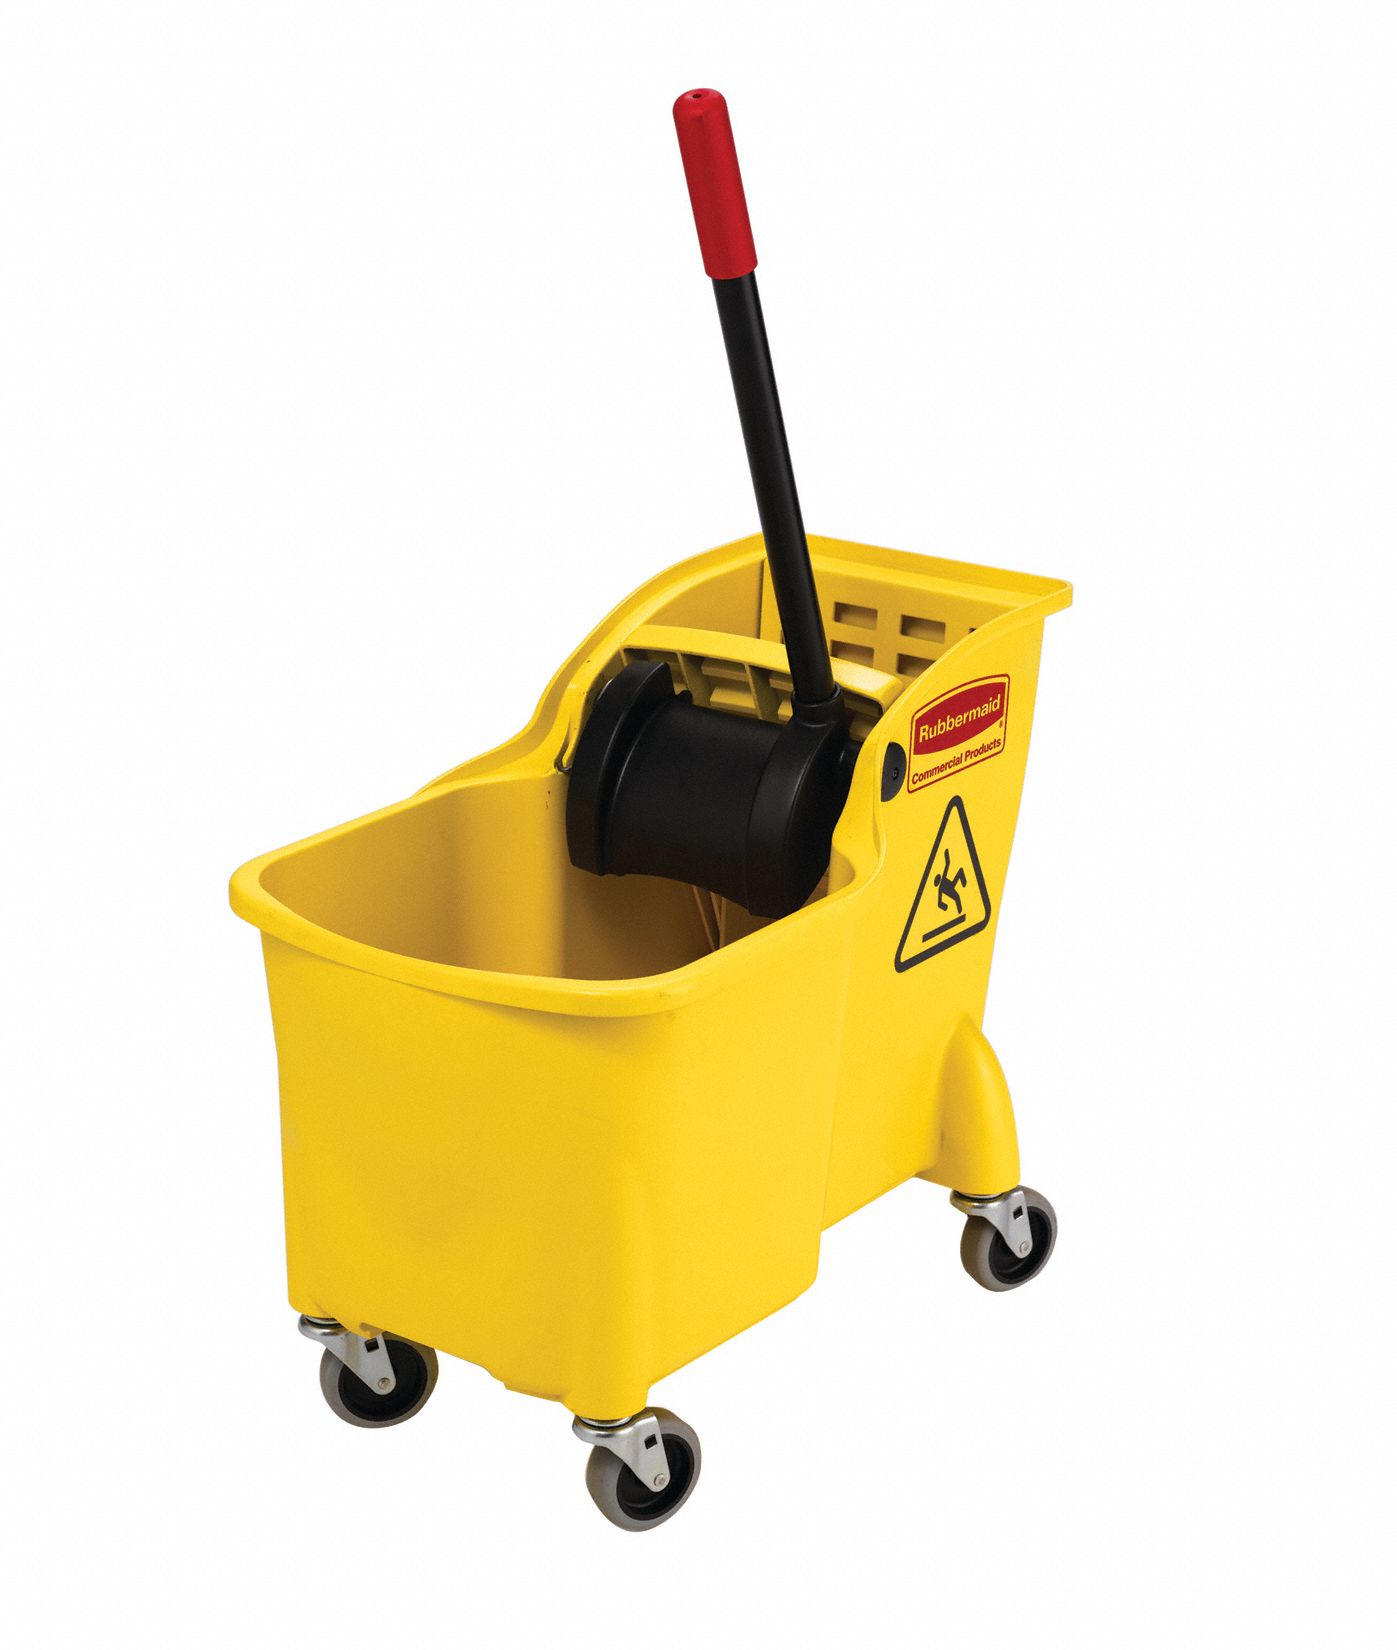 WRINGER-24QT-YEL Side Press Wringer Replacement for Mop Bucket 24 qt Yellow 